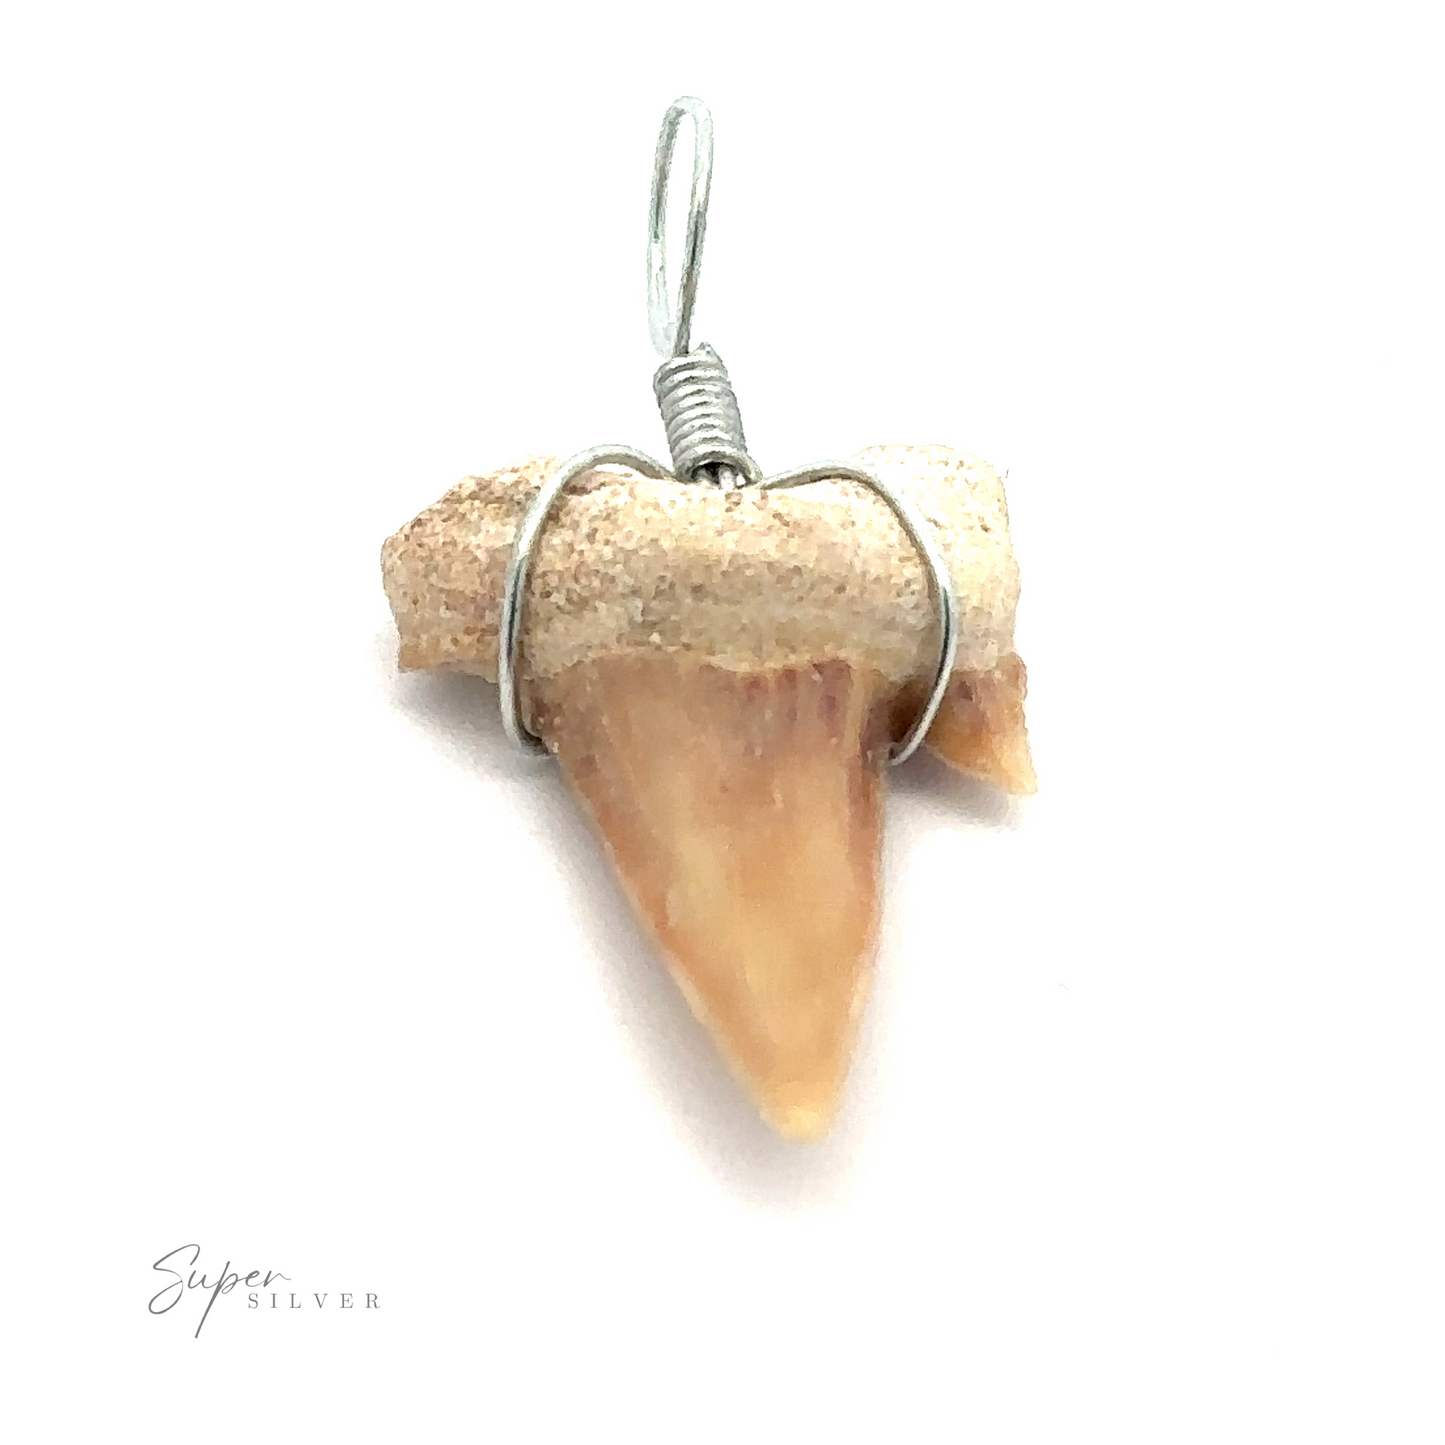 A mixed metal shark's tooth necklace wrapped in silver wire to form a pendant, labeled "Sharks Tooth Wire Wrapped Pendant.